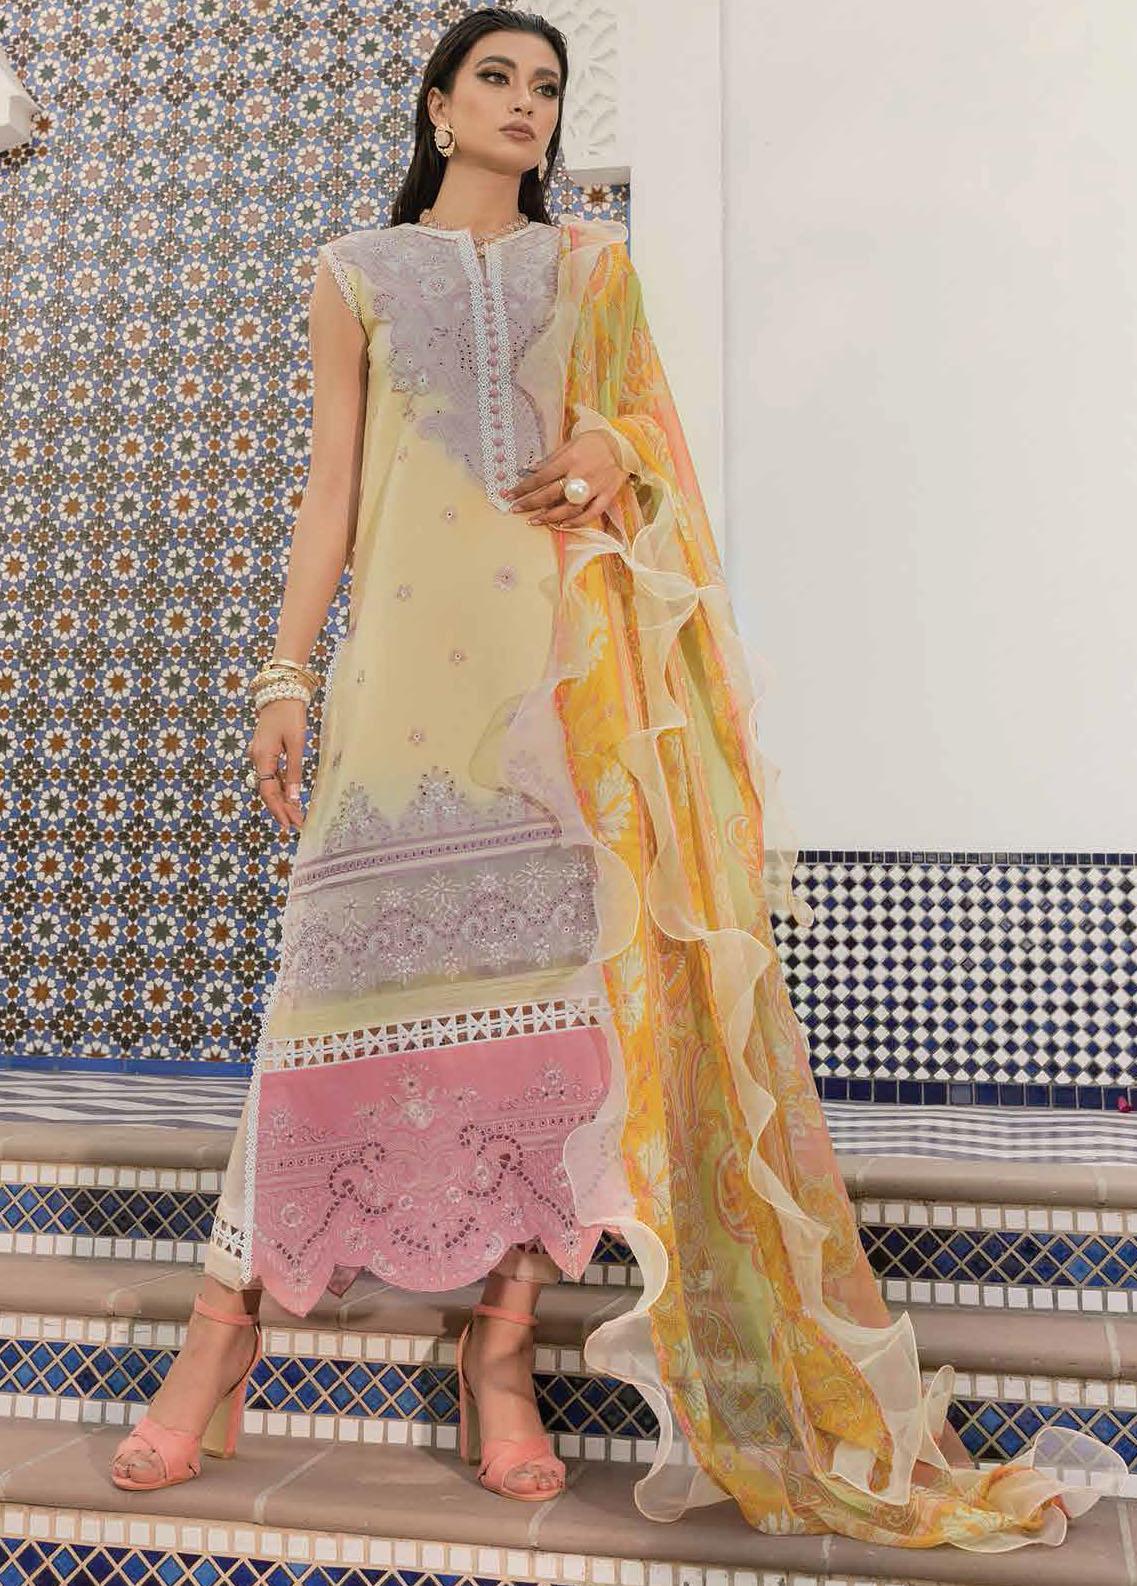 Hemline By Mushq Embroidered Lawn Suit Unstitched 3 Piece 01B Peach Peony MHL22 – Summer Collection